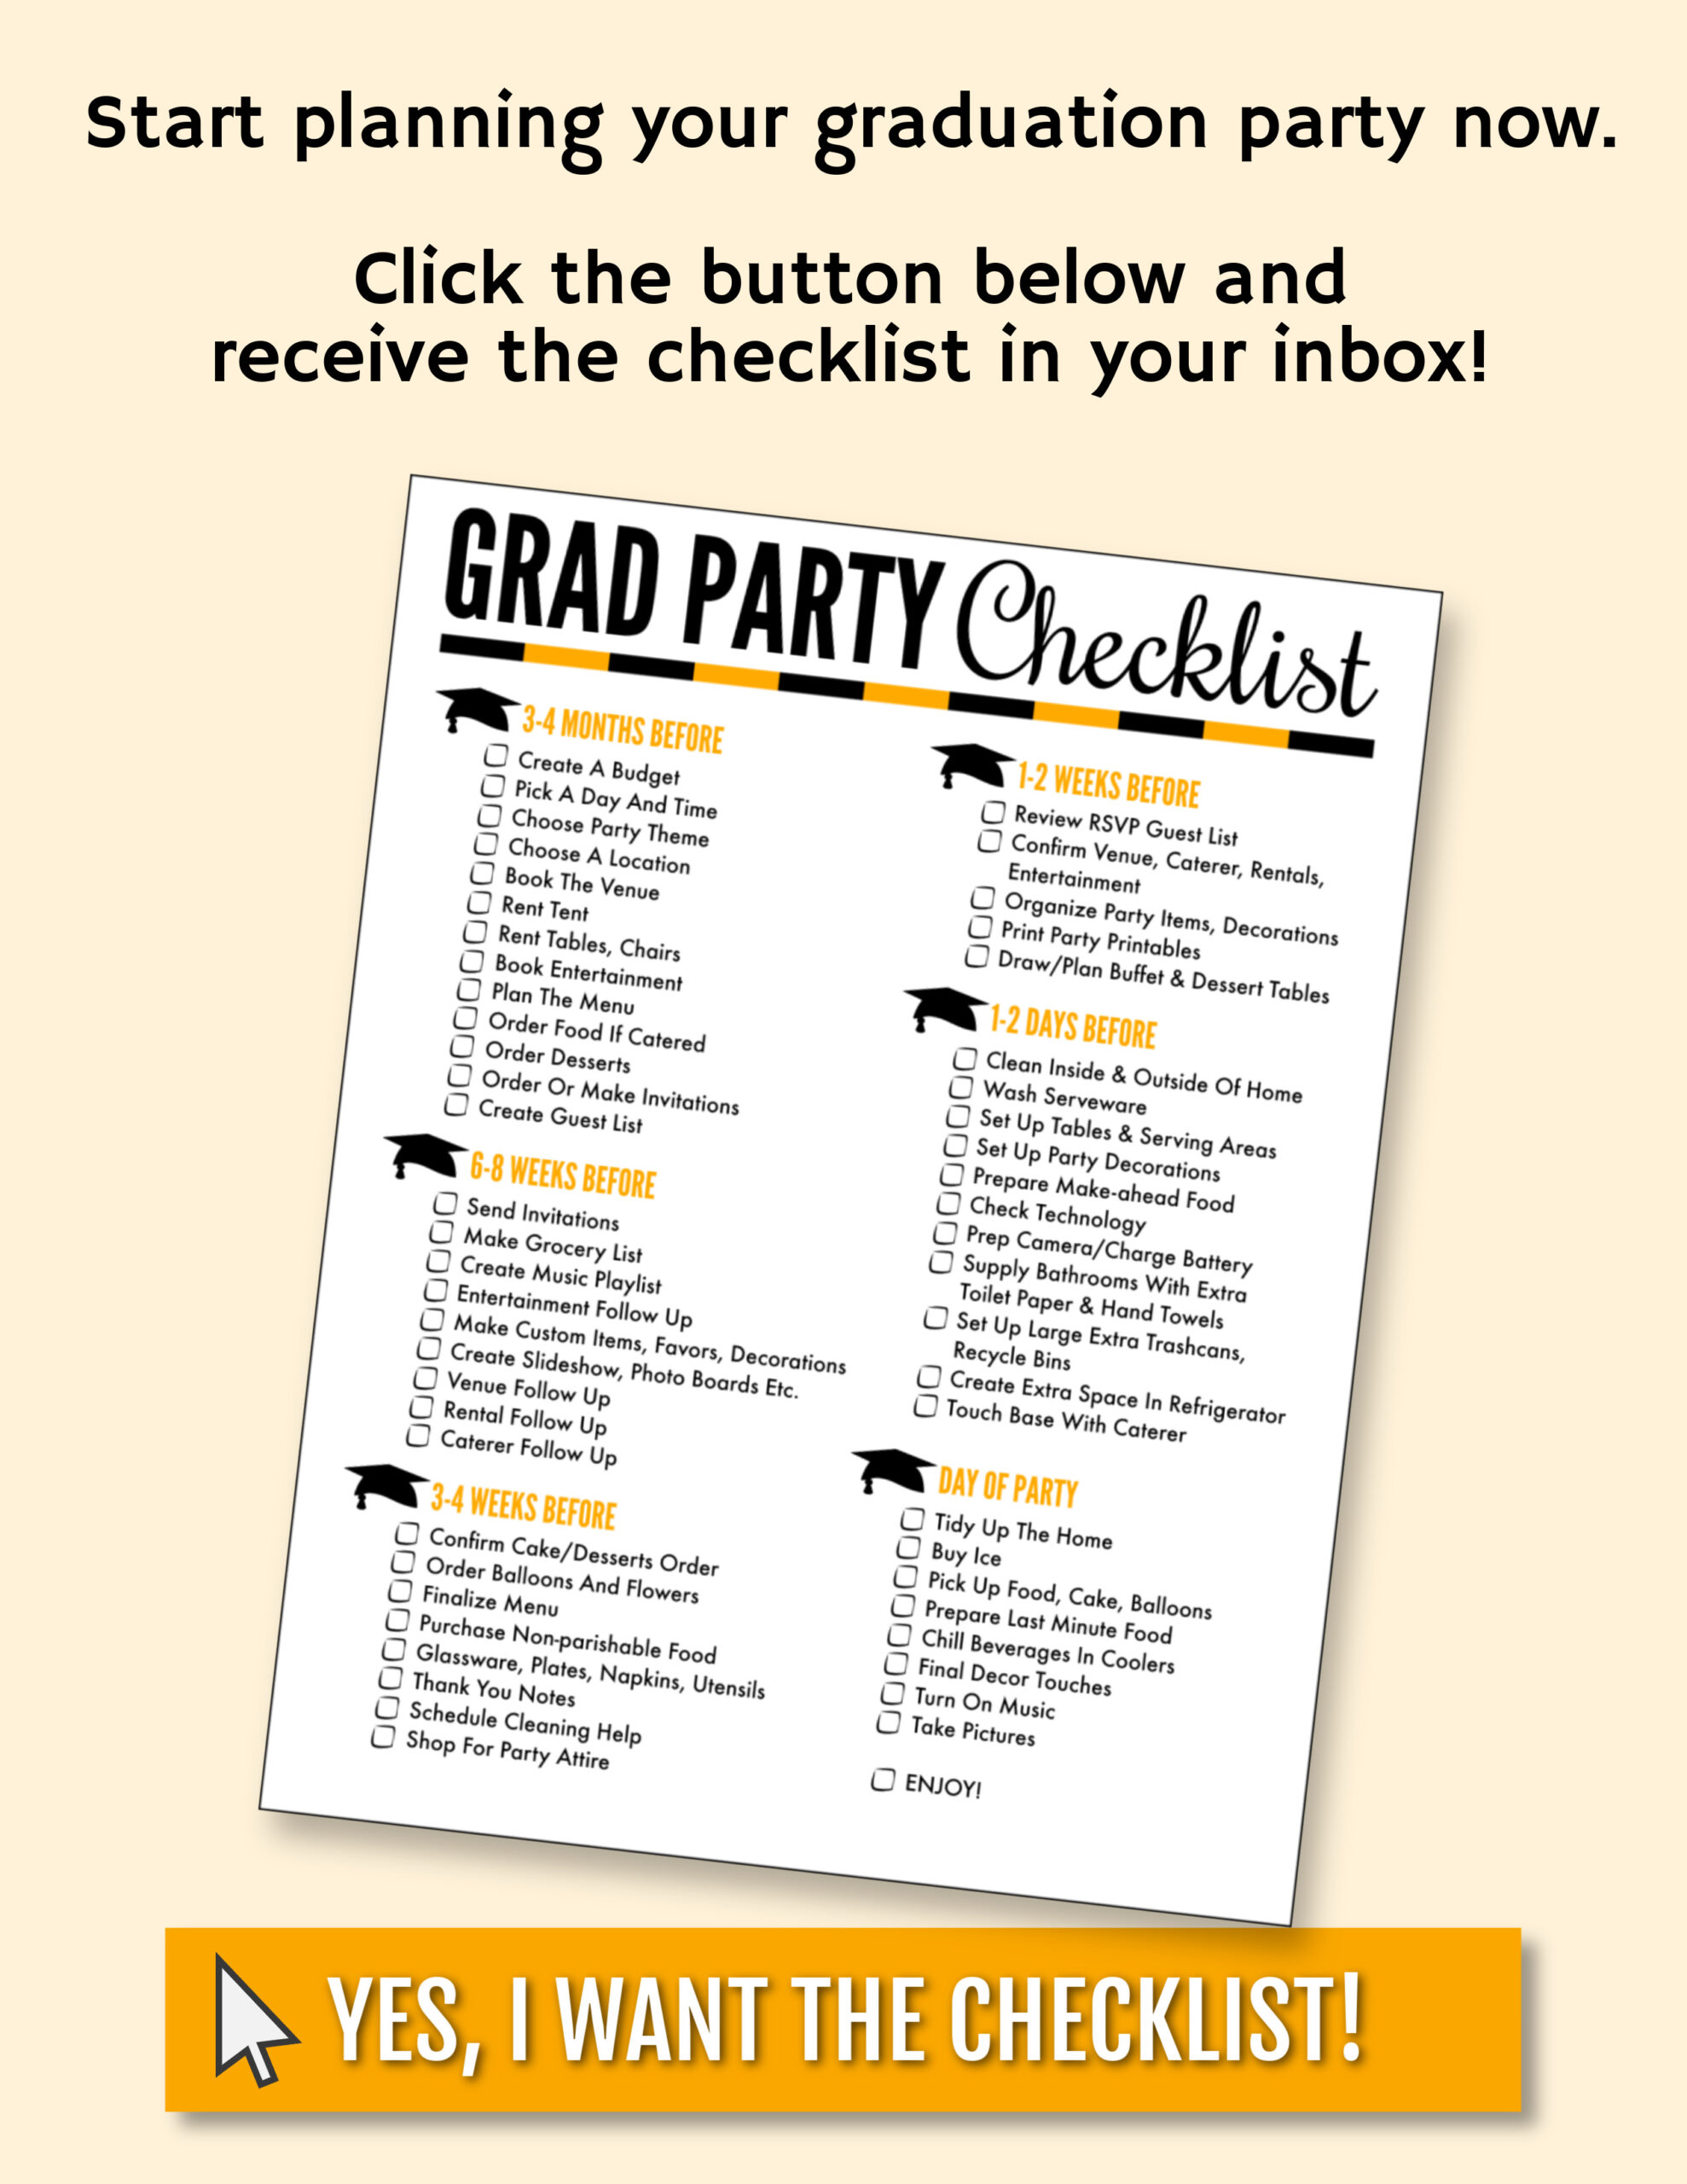 optin graduation party checklist image to receive the free pdf download.